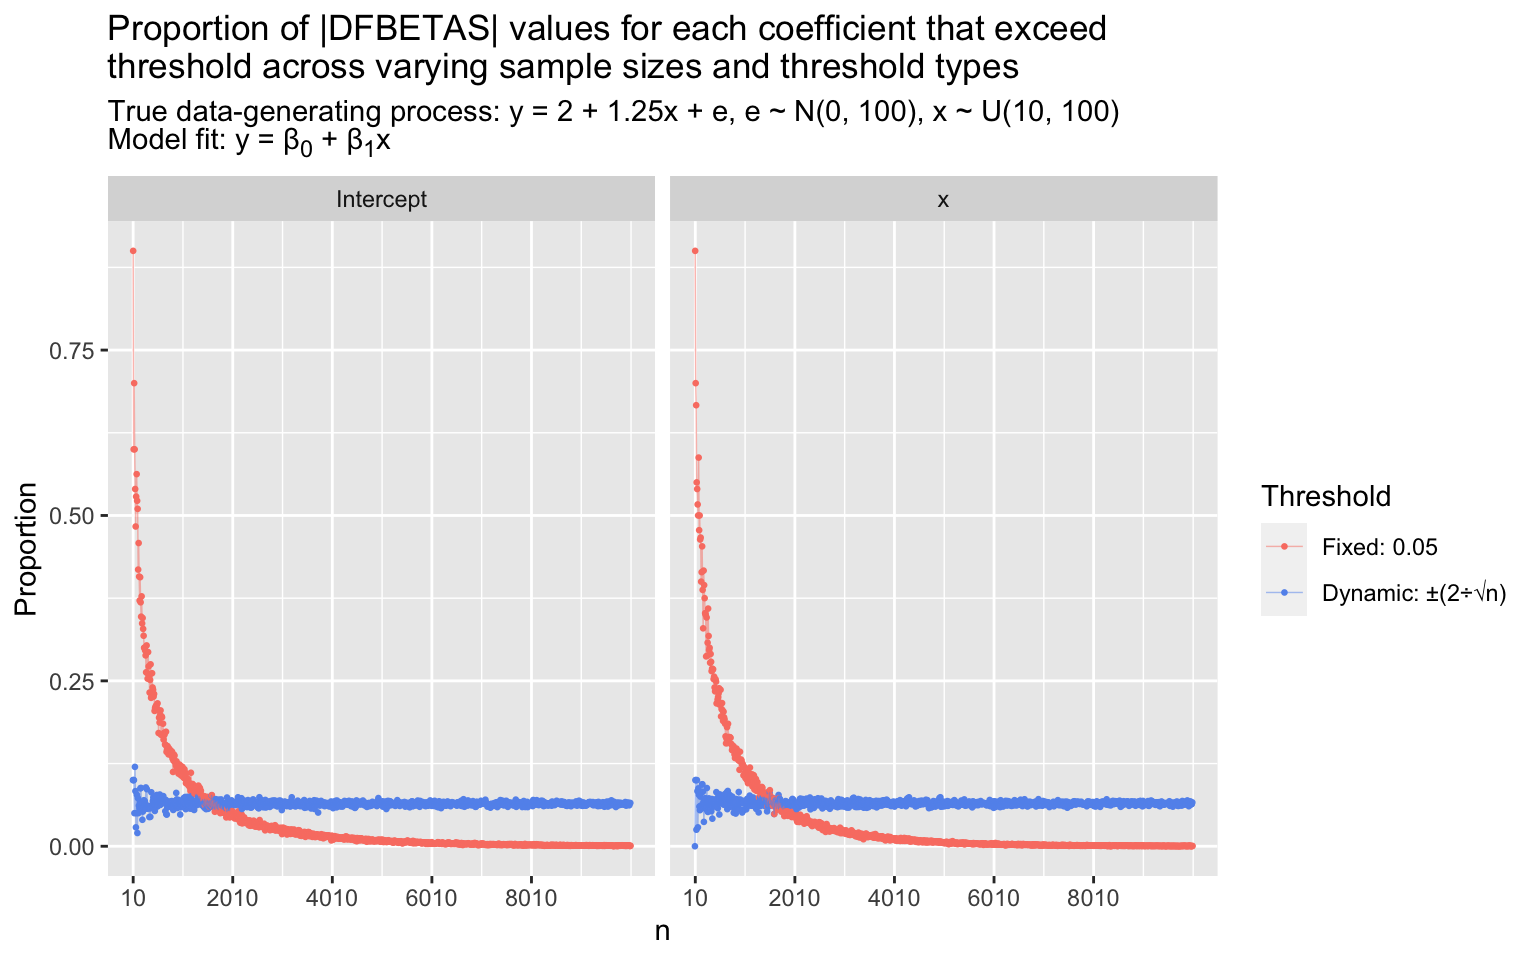 proportion of dfbetas values exceeding fixed and dynamic thresholds across varying sample sizes